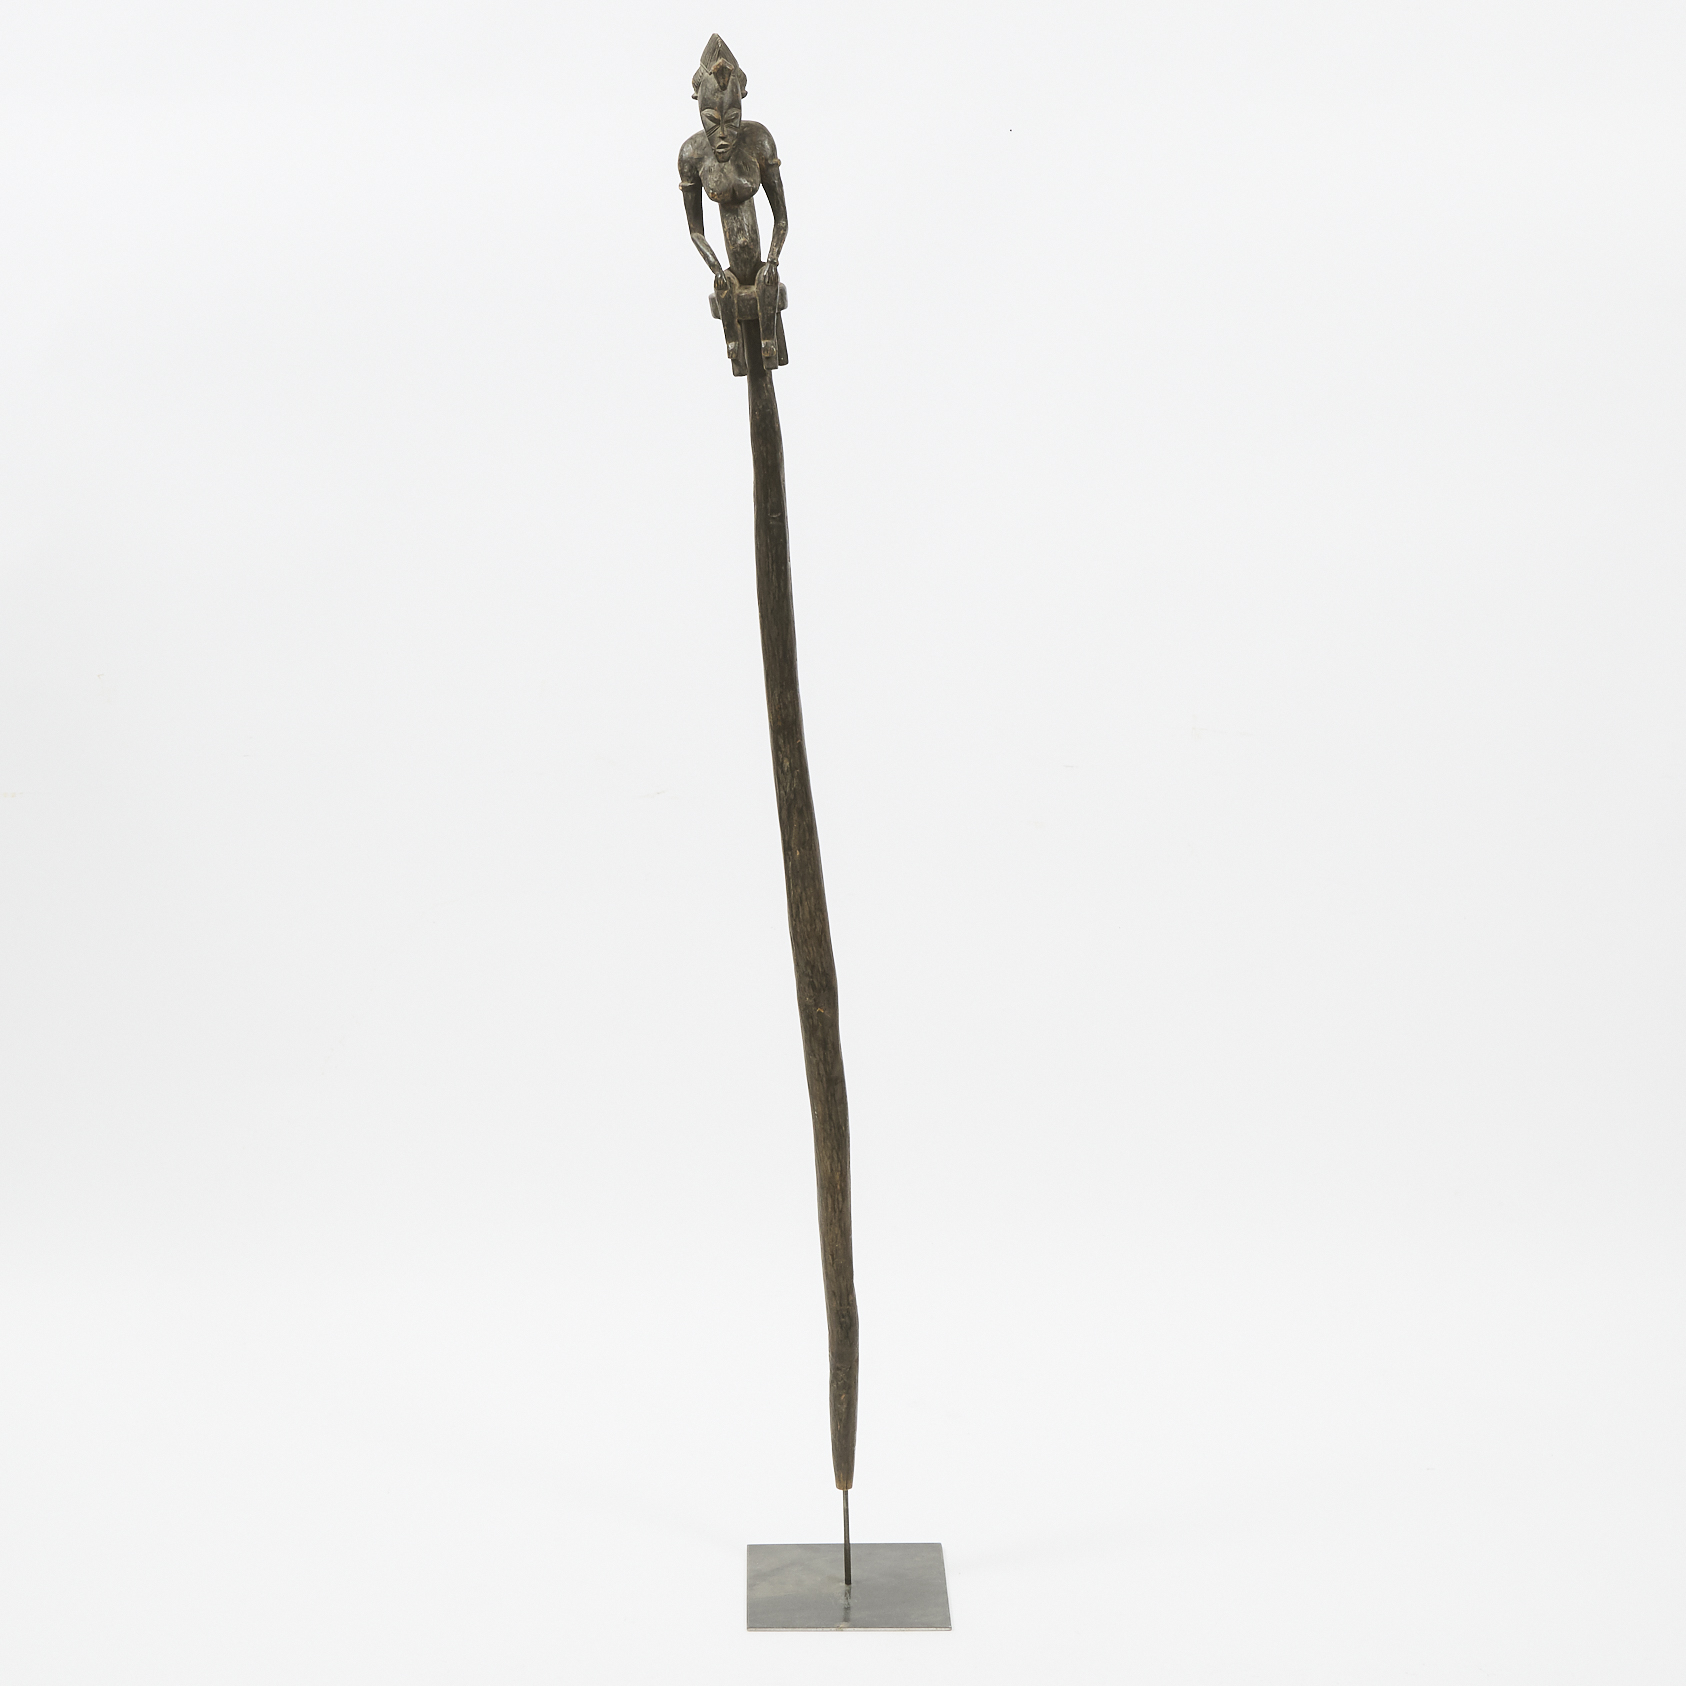 Senufo Carved Wood Female Figural Staff, South Africa, late 20th century